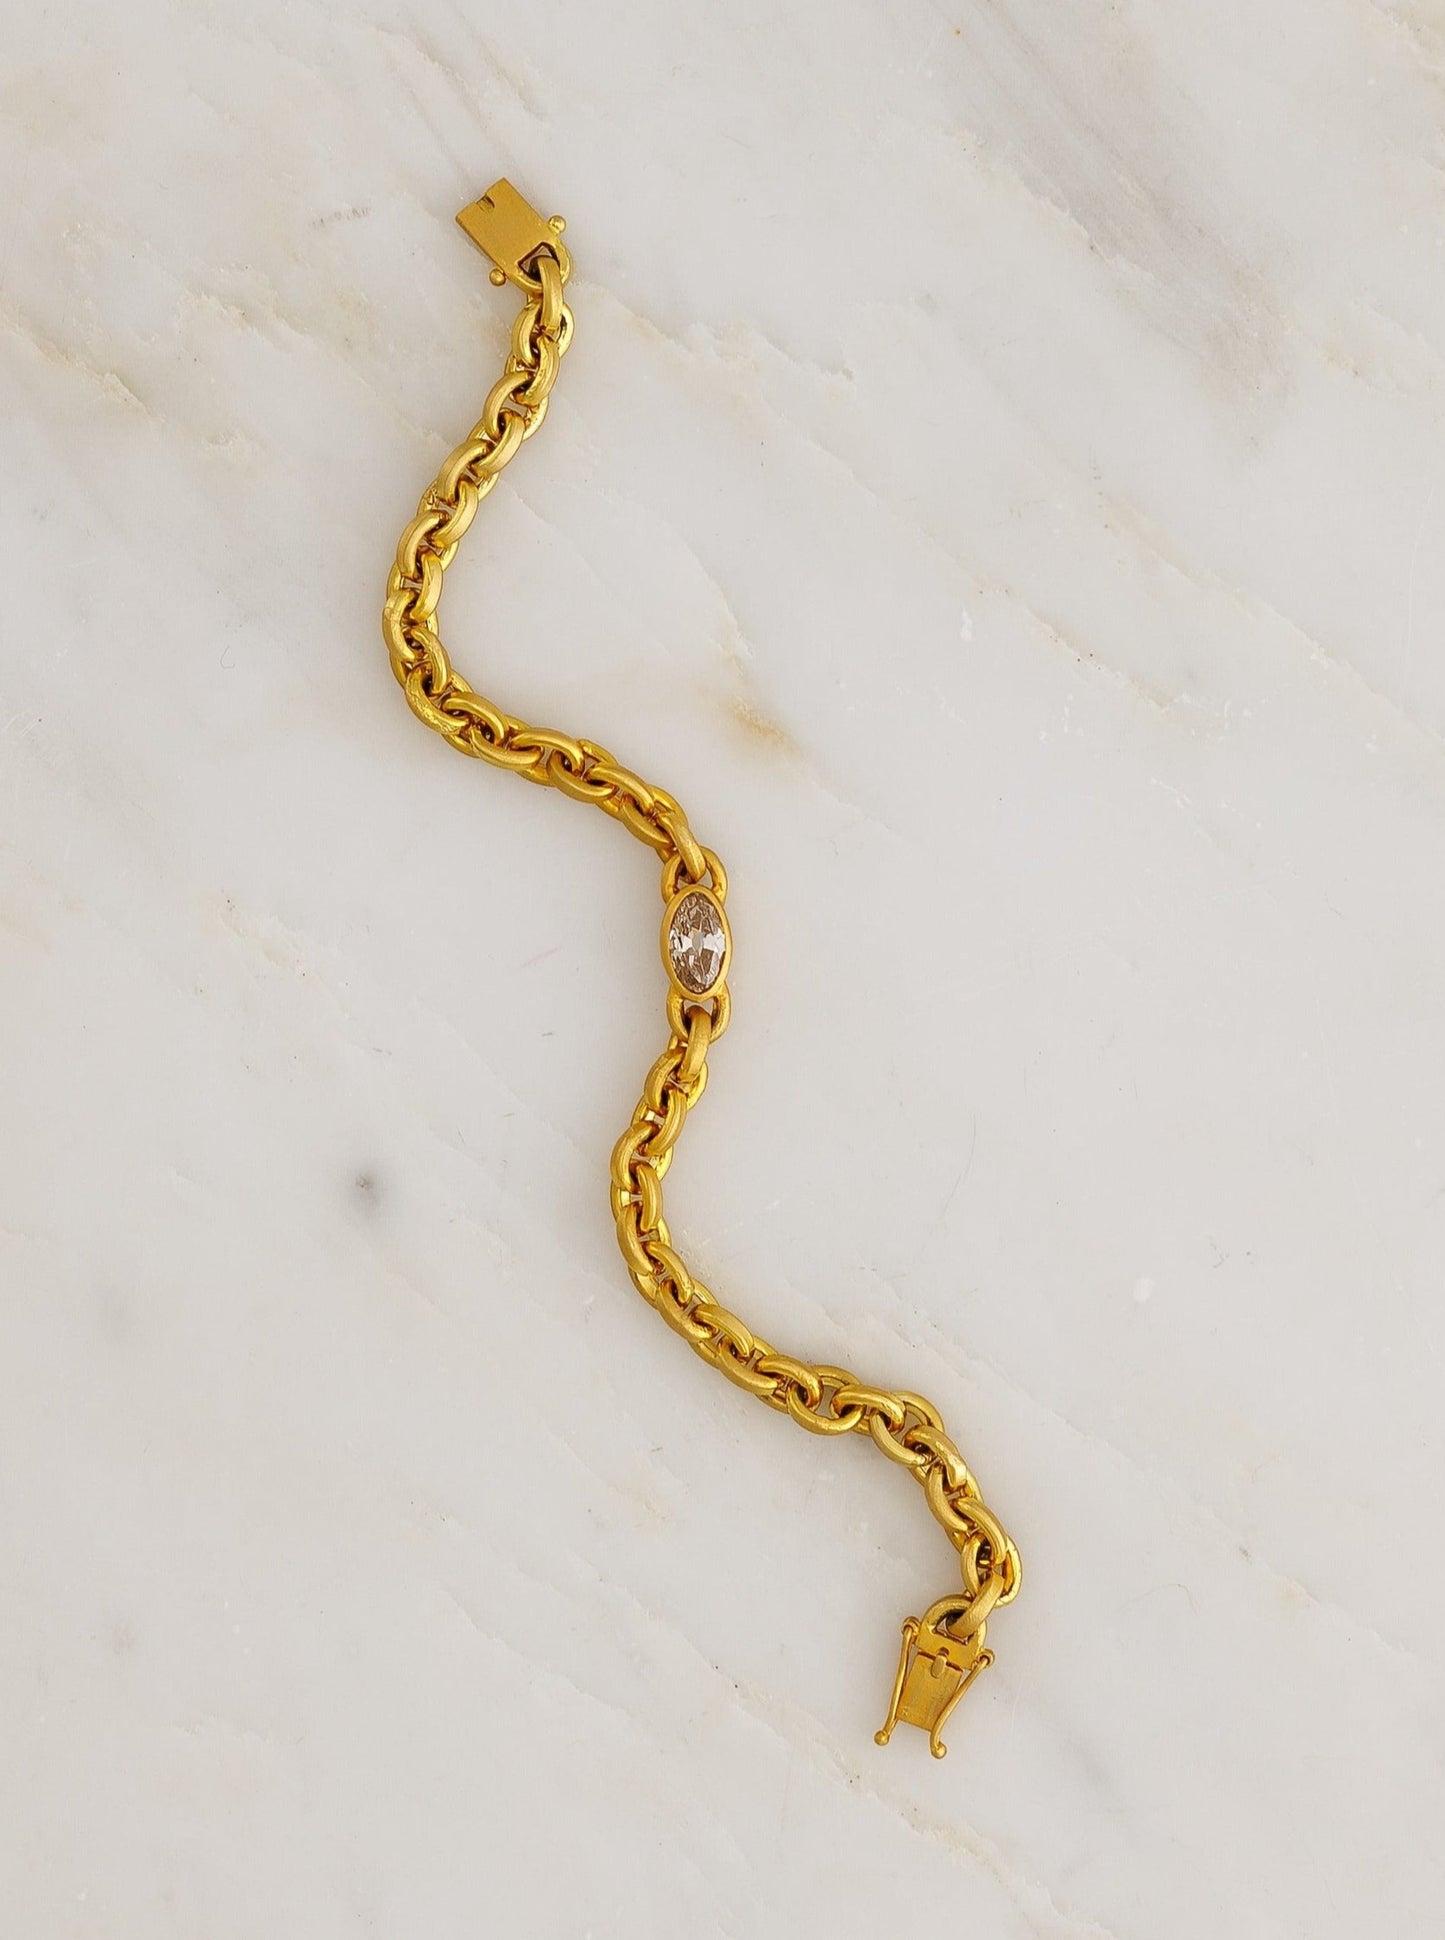 One of a Kind Moval Diamond Oversized Signature Chain Bracelet